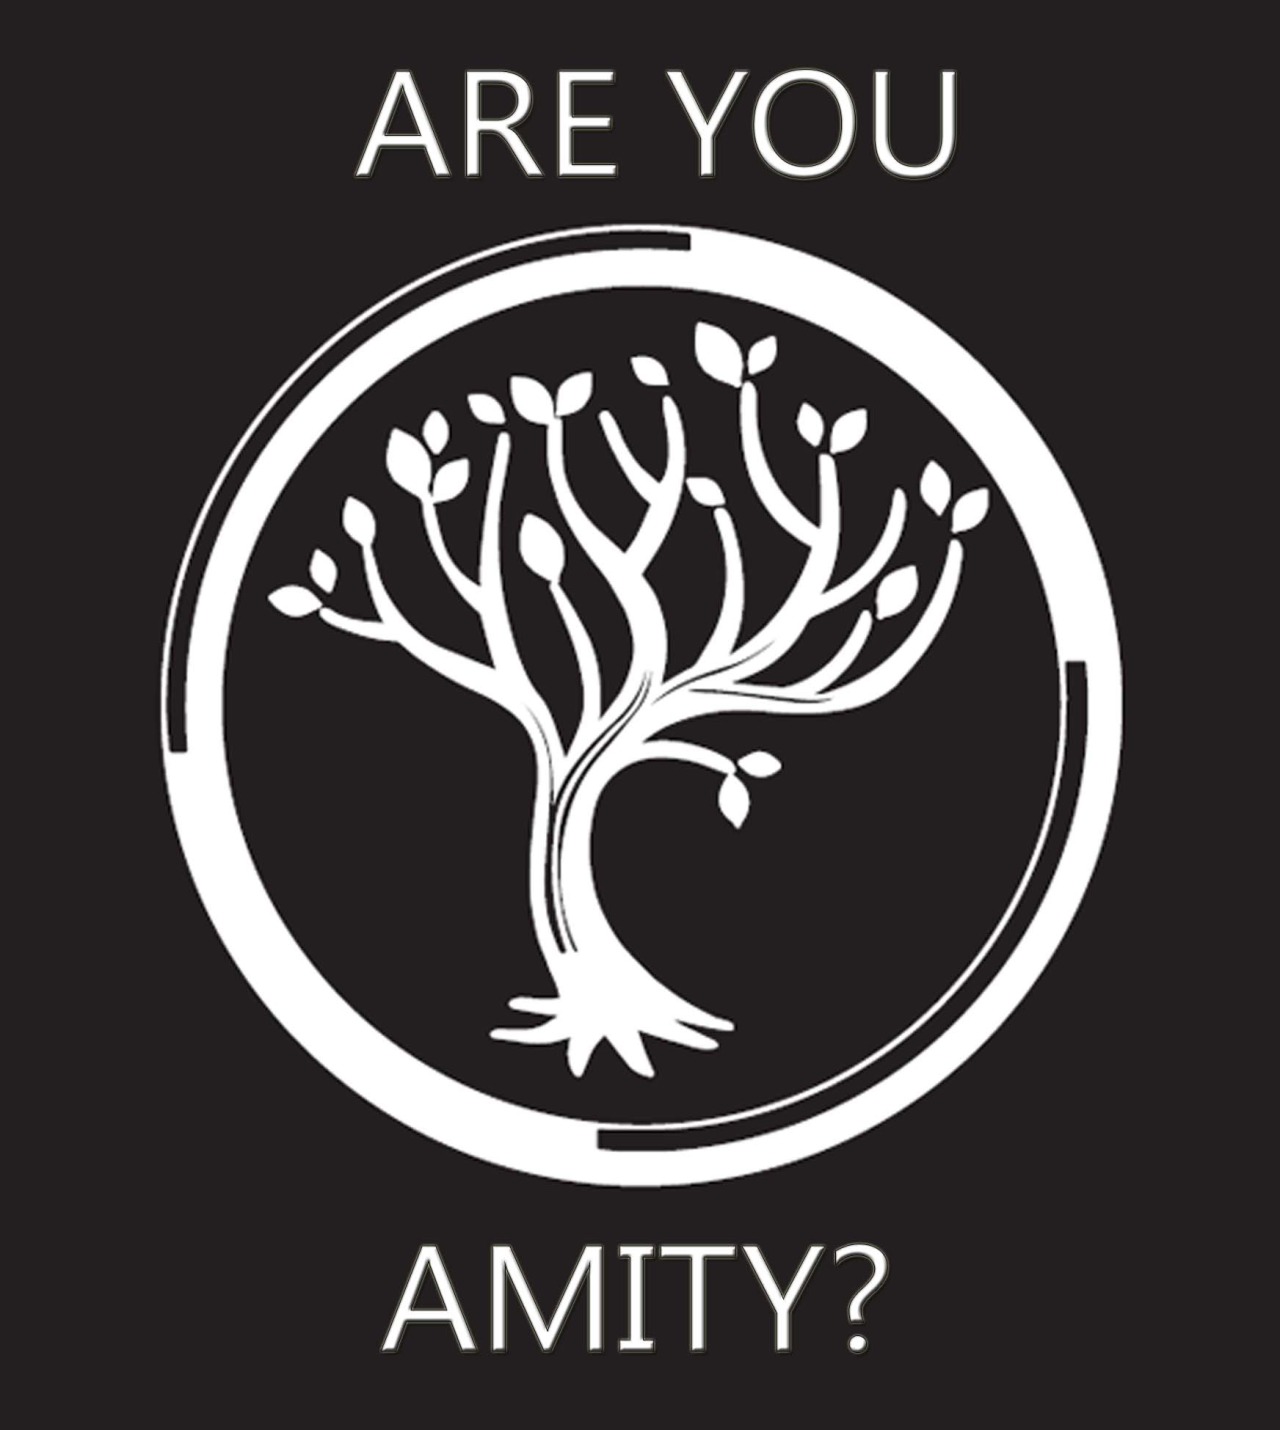 Are you Amity?